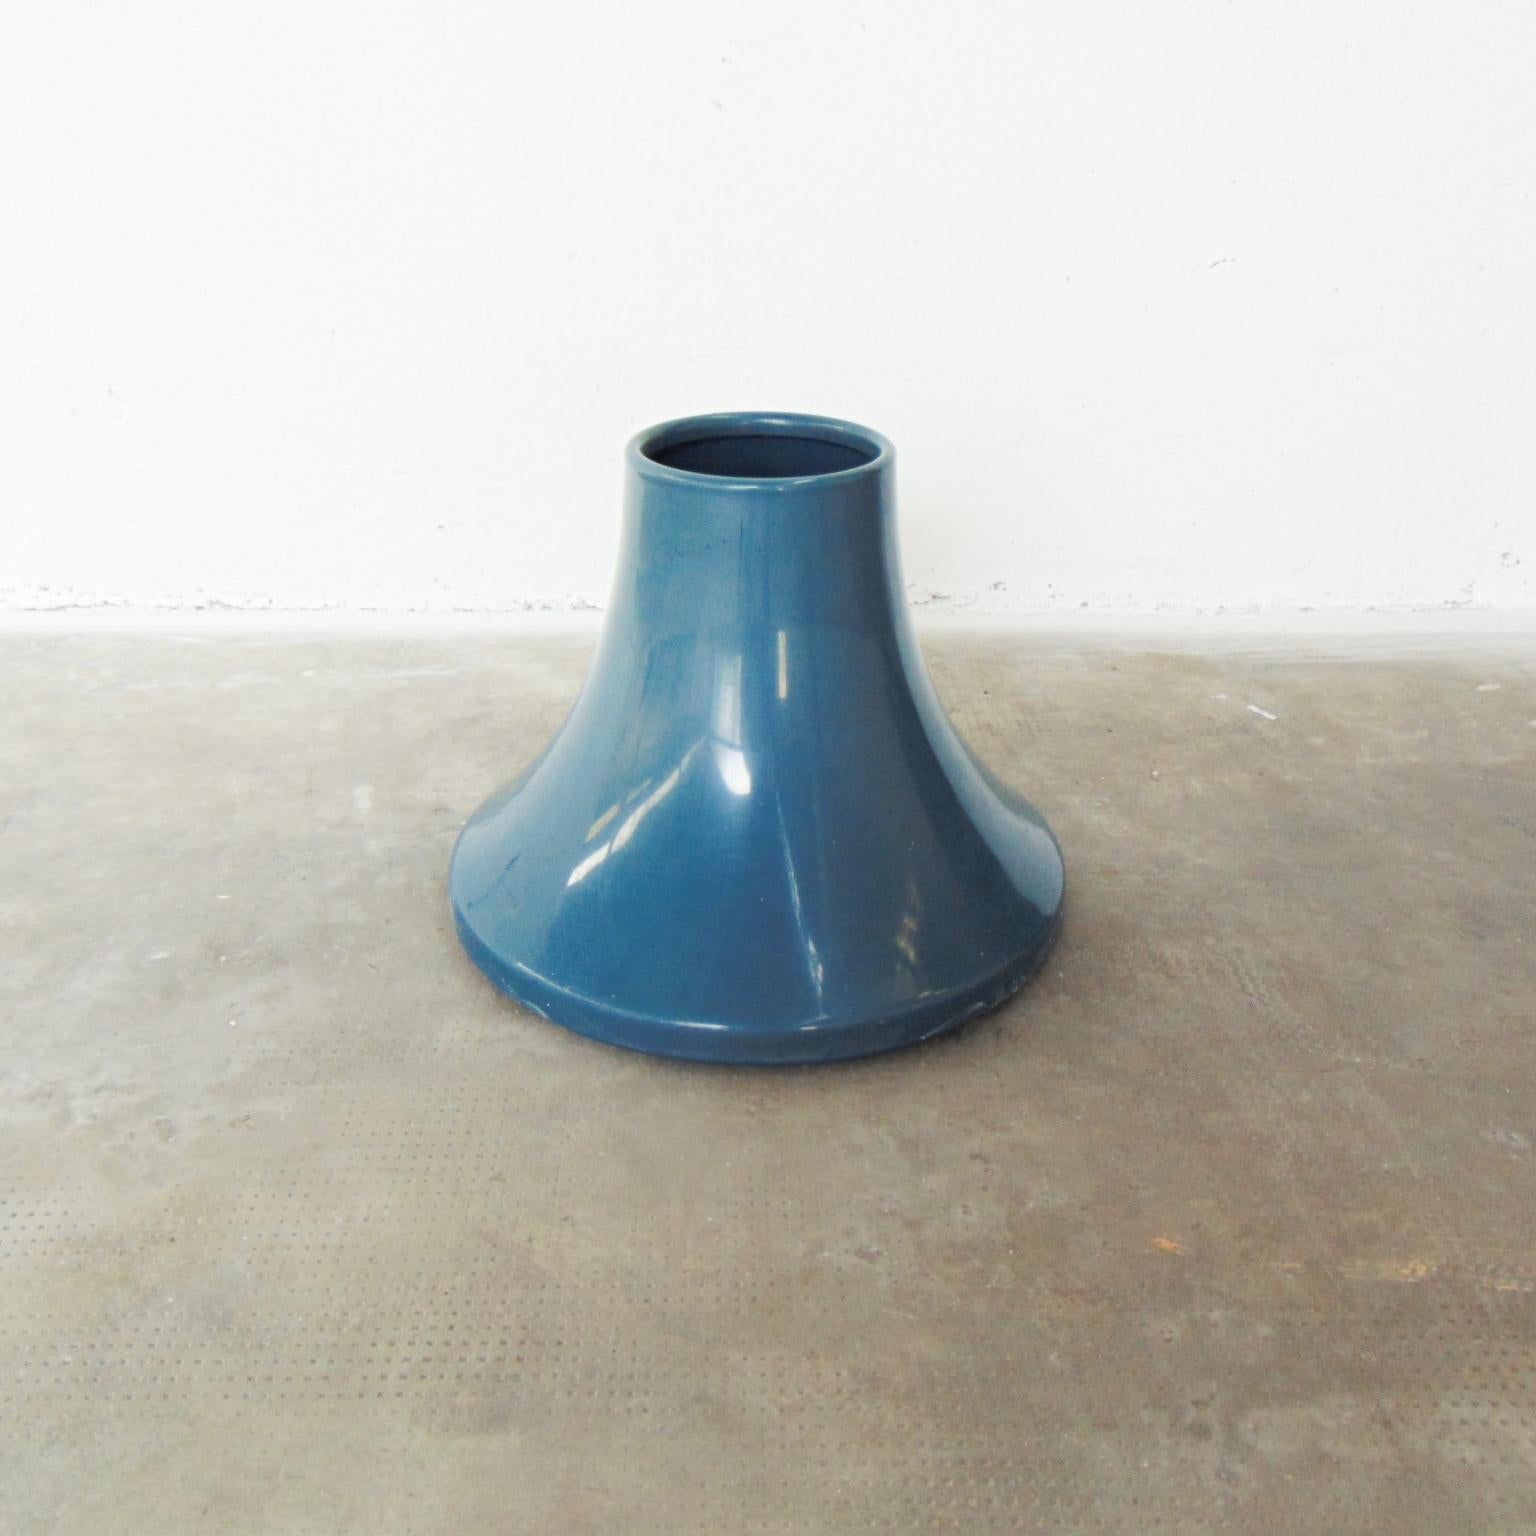 Space Age 1972 Umbrella Stand in Blue Thermoformed Plastic by R. Lera for Sormani, Italy For Sale